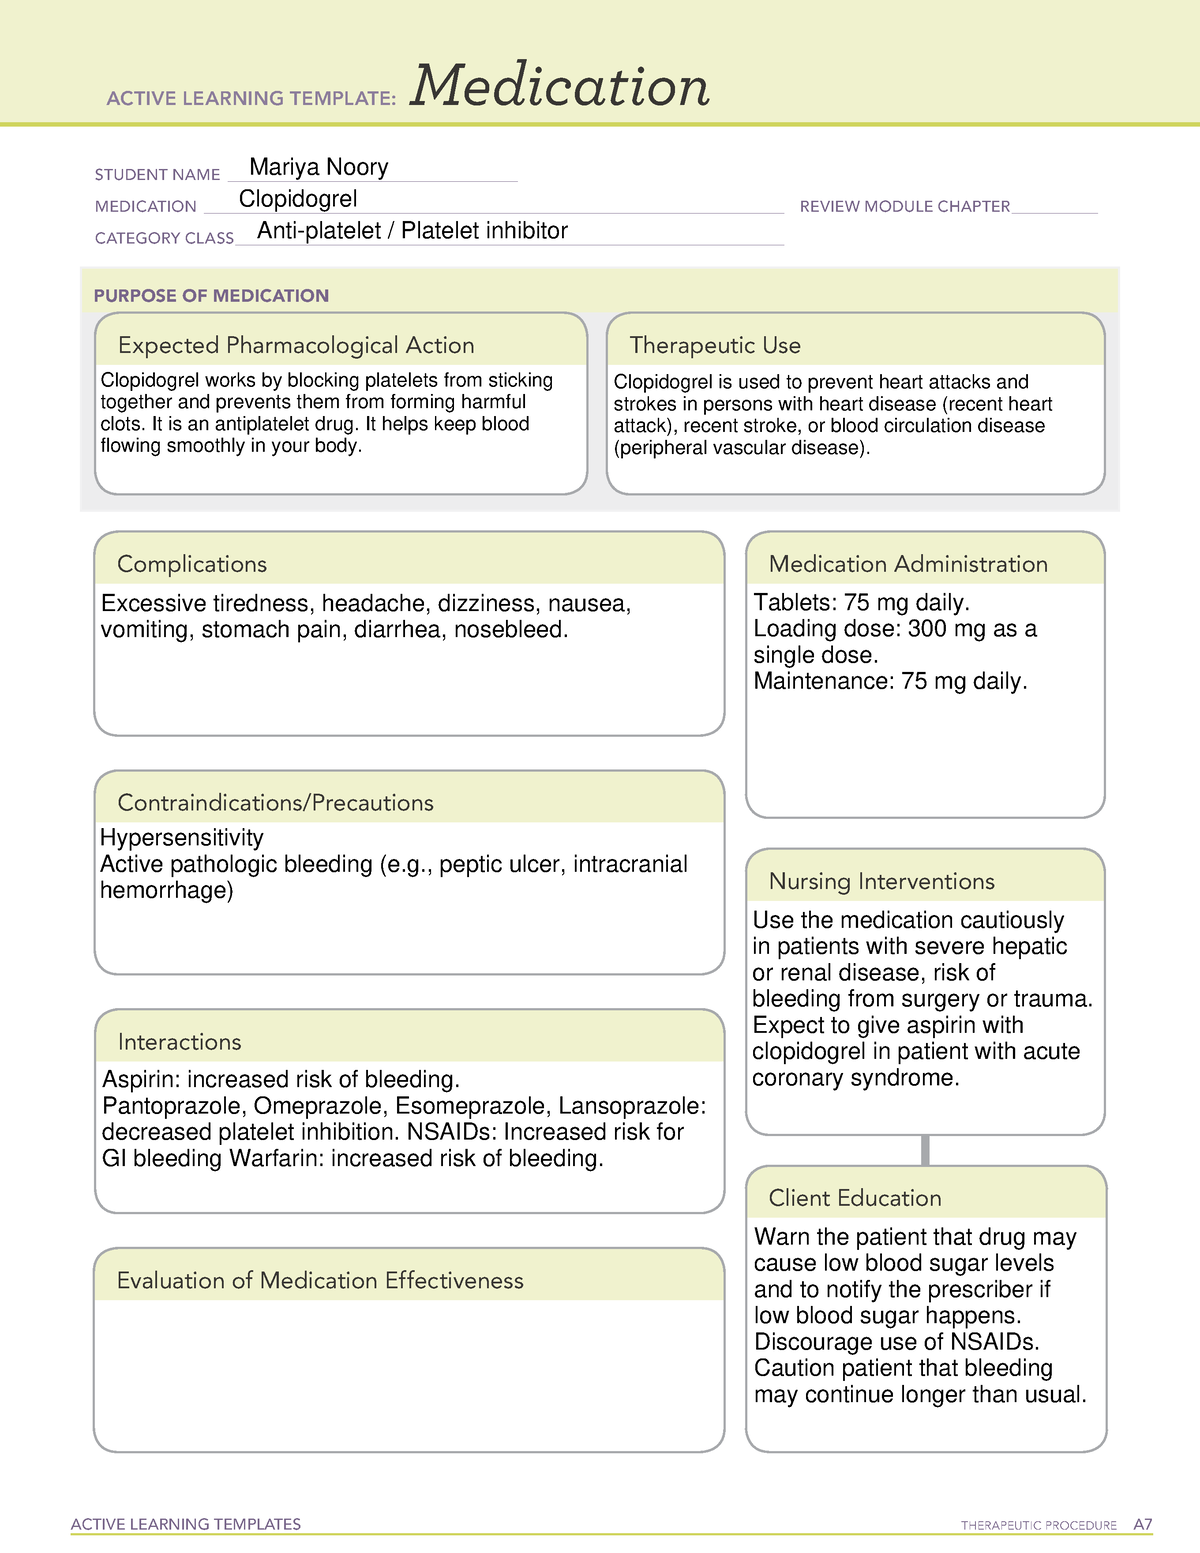 Active Learning Template medication Clopidogrel ACTIVE LEARNING